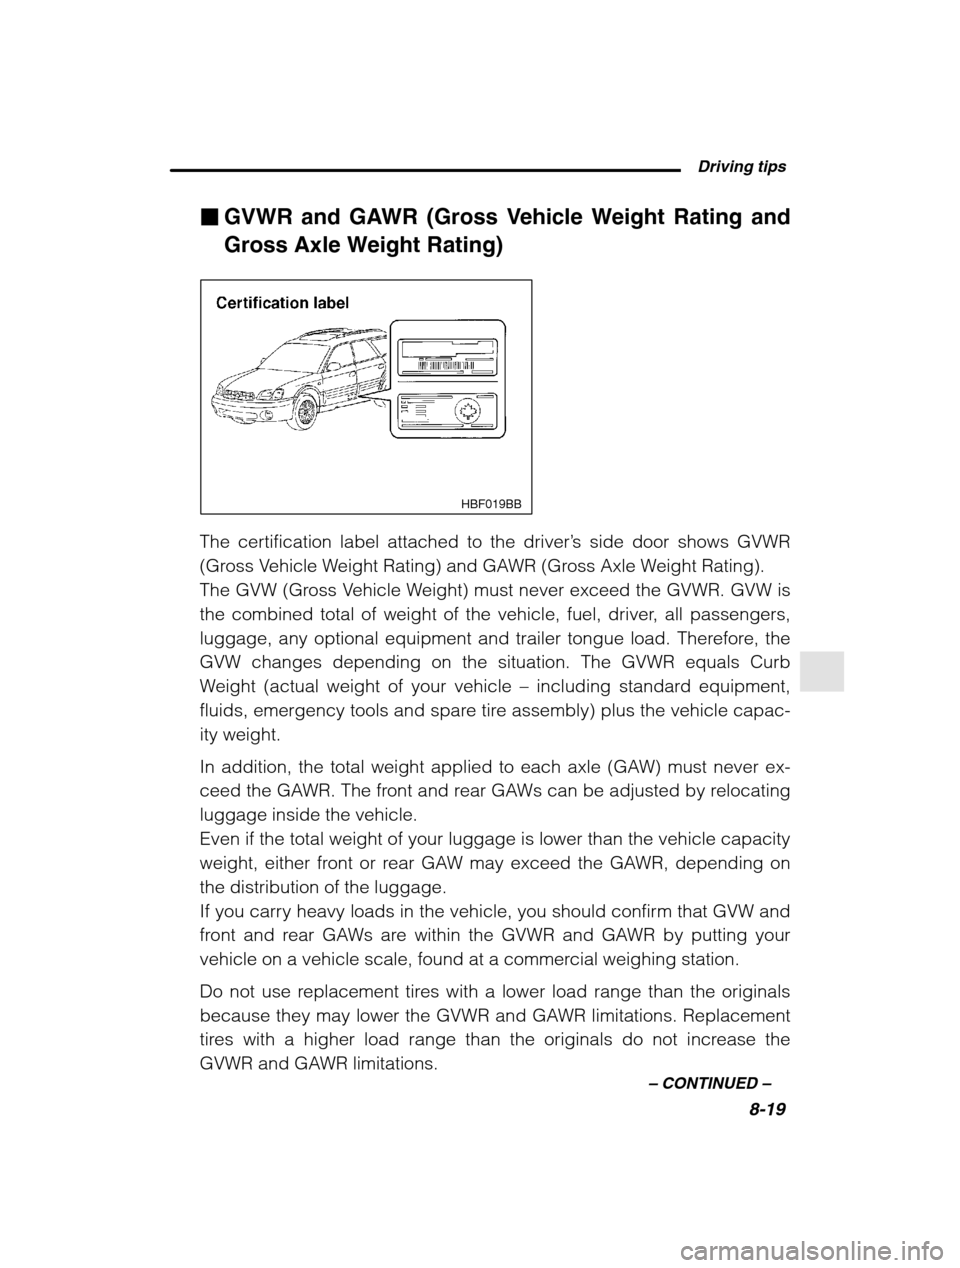 SUBARU OUTBACK 2002 3.G Owners Manual  Driving tips8-19
–
 CONTINUED  –
�GVWR and GAWR (Gross Vehicle Weight Rating and 
Gross Axle Weight Rating)
HBF019BB
The certification label attached to the driver ’s side door shows GVWR
(Gros